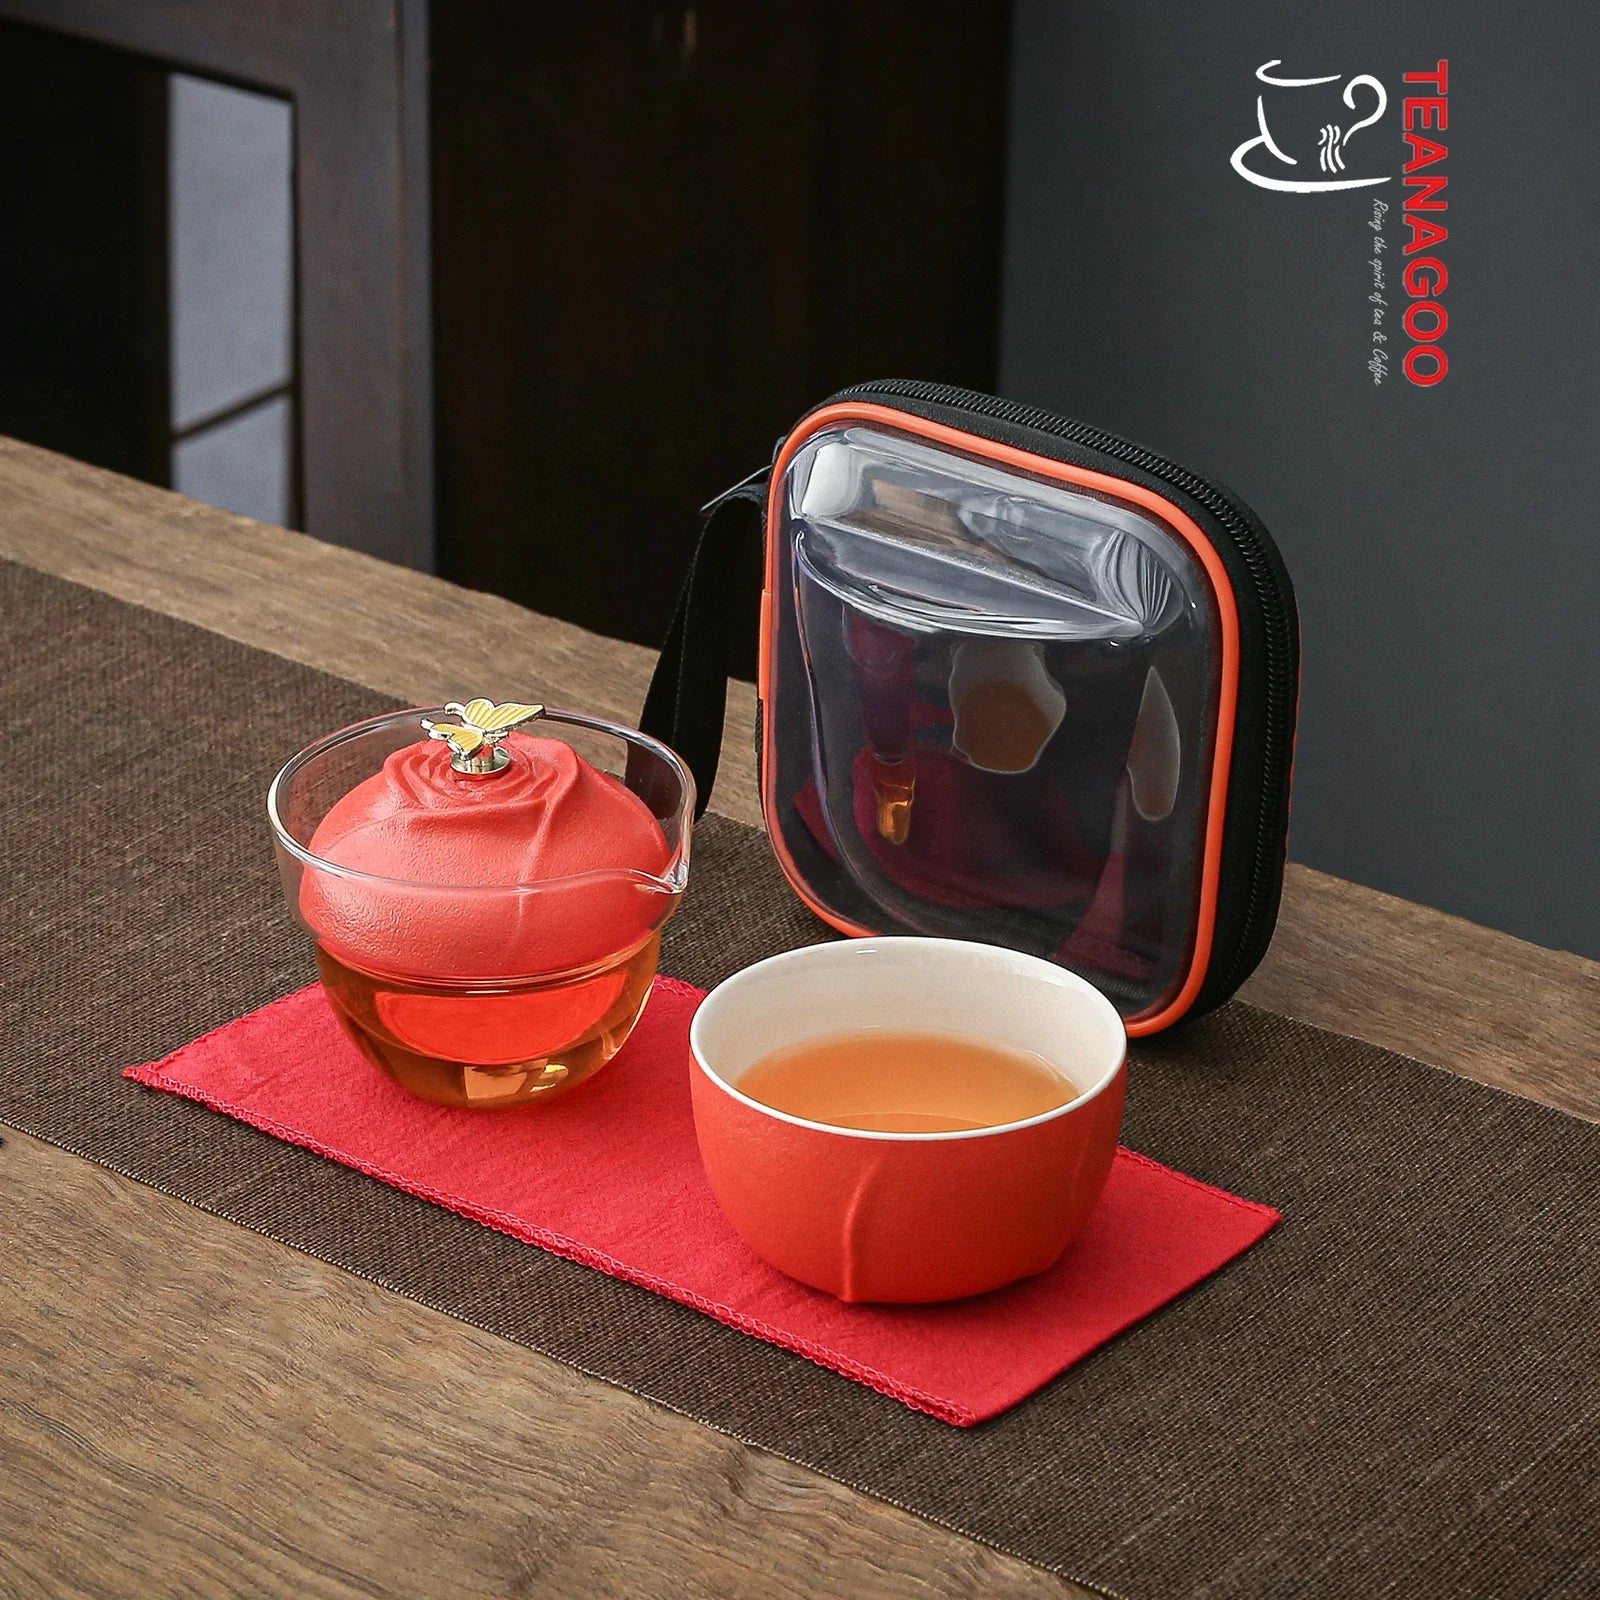 Portable ceramic and glass private red travel tea set with bag